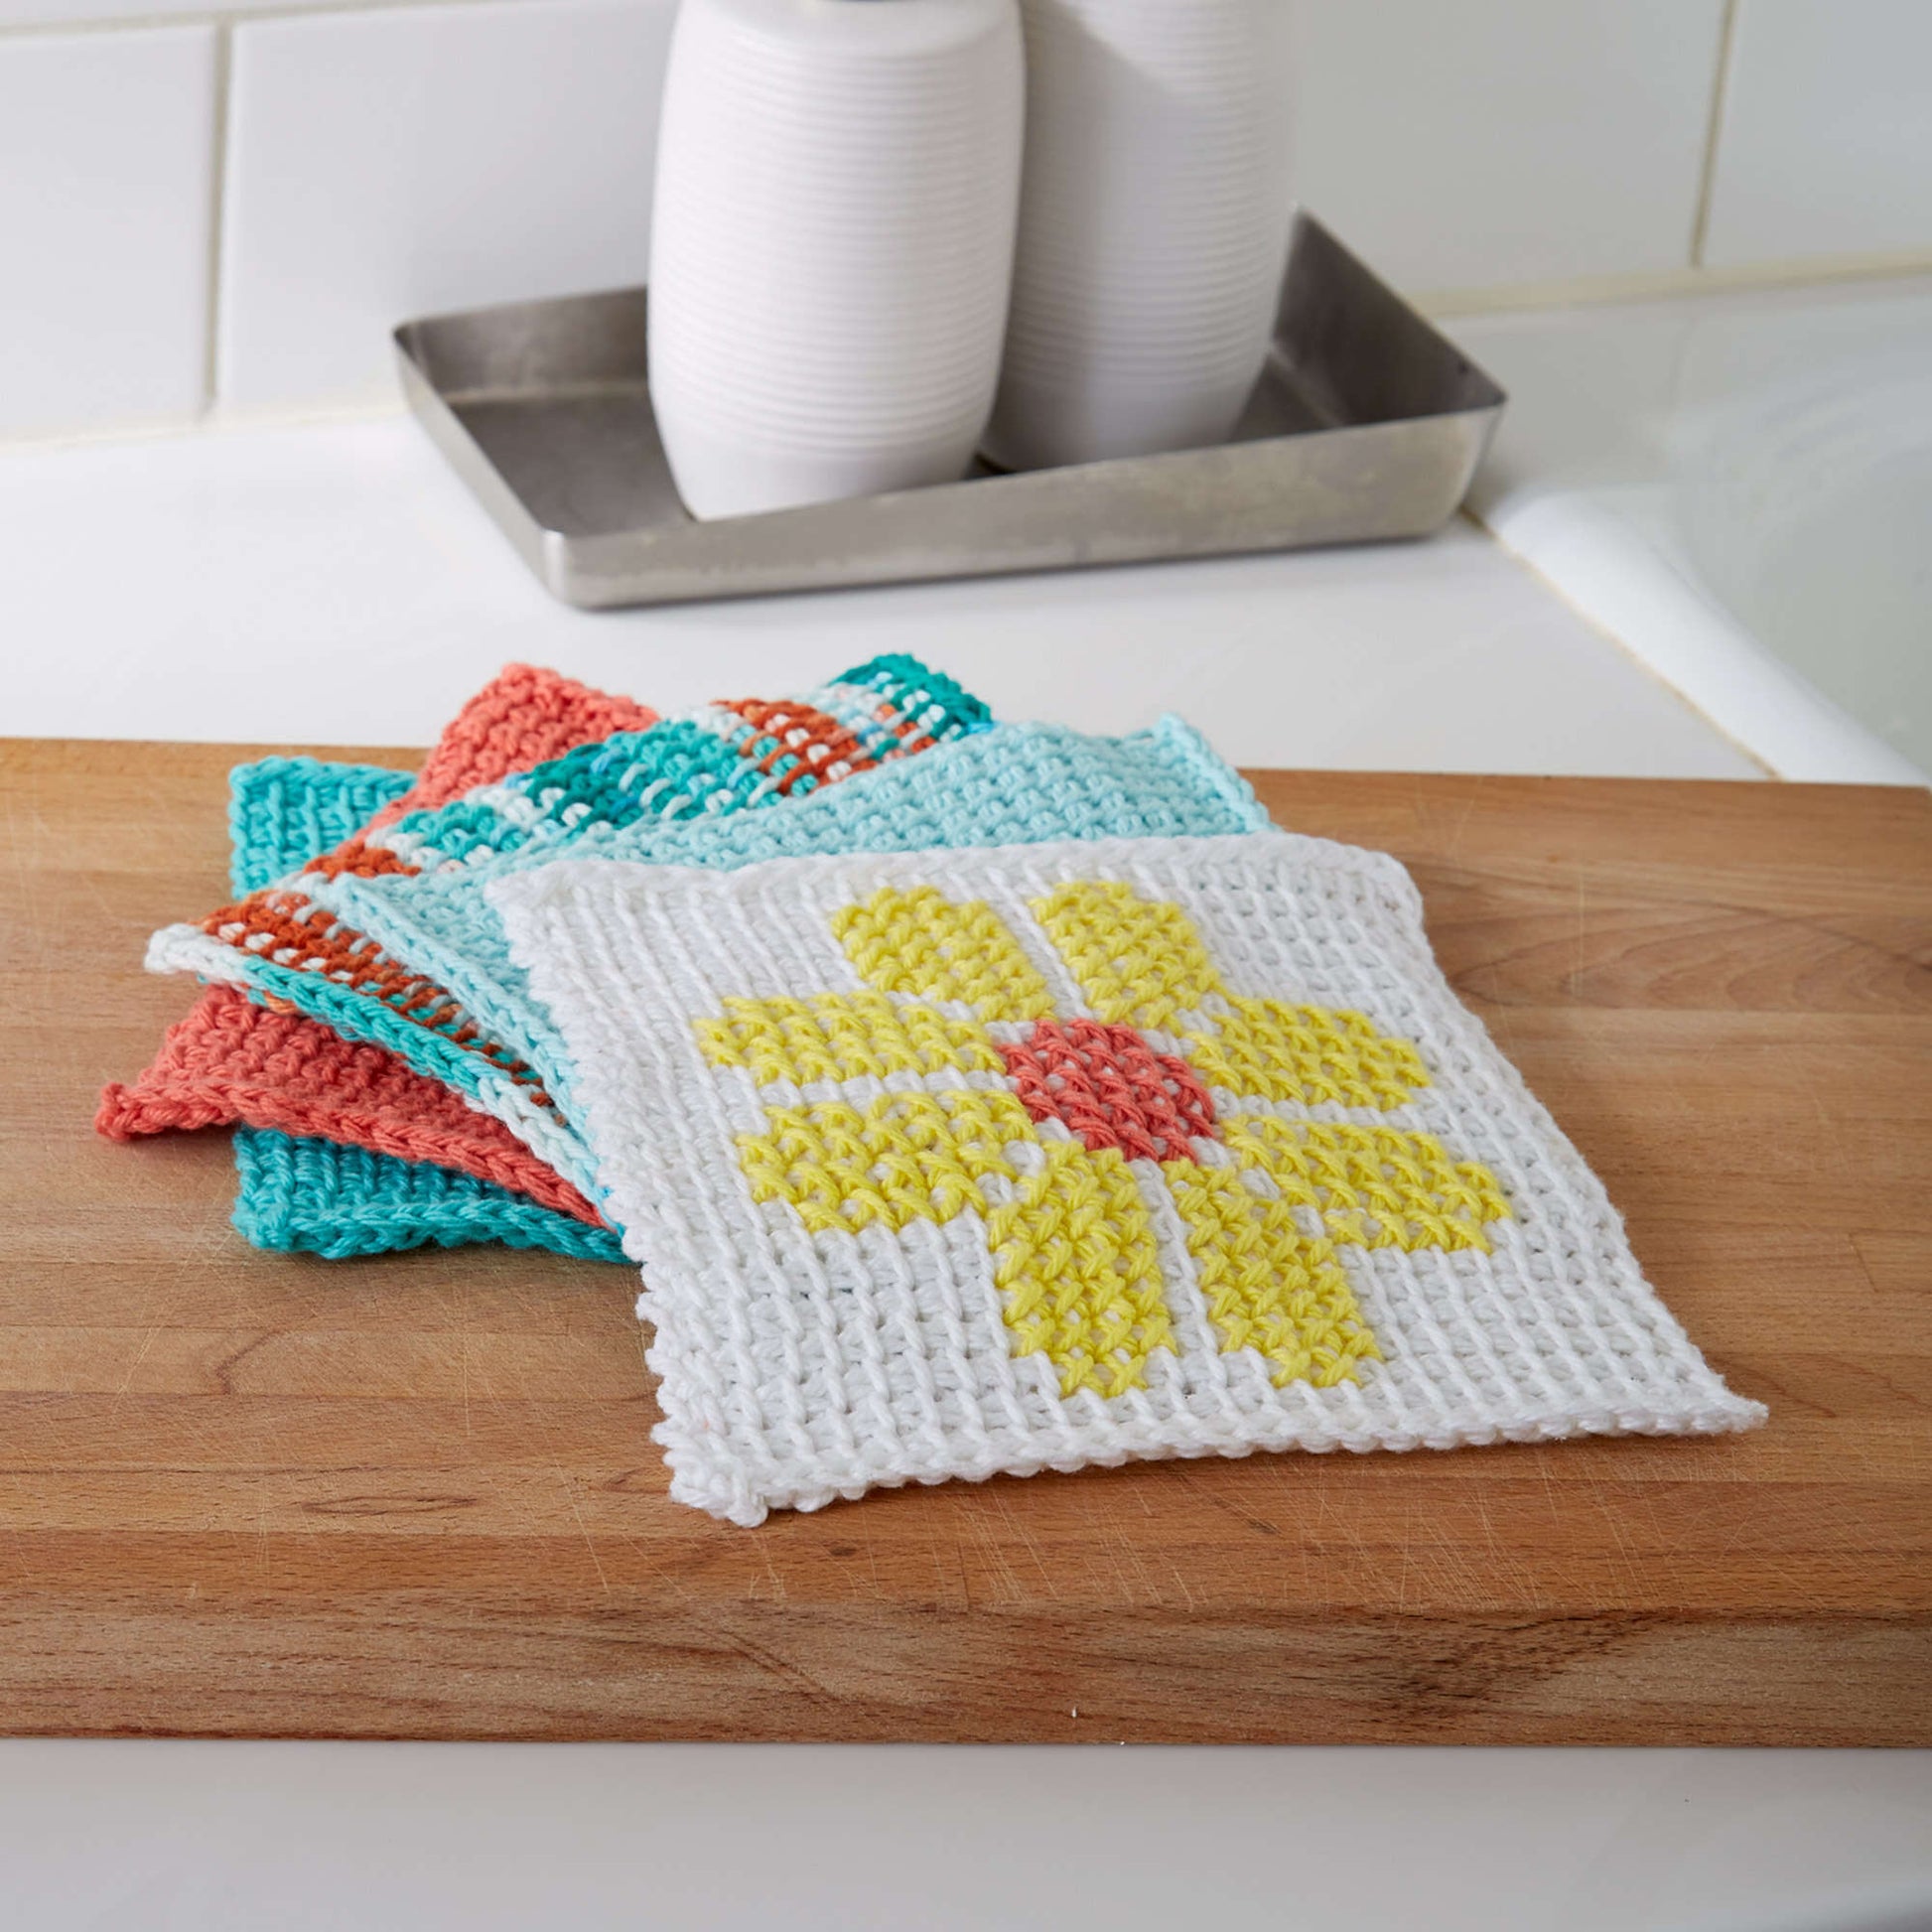 Always Do This One Trick With Your Dishcloths